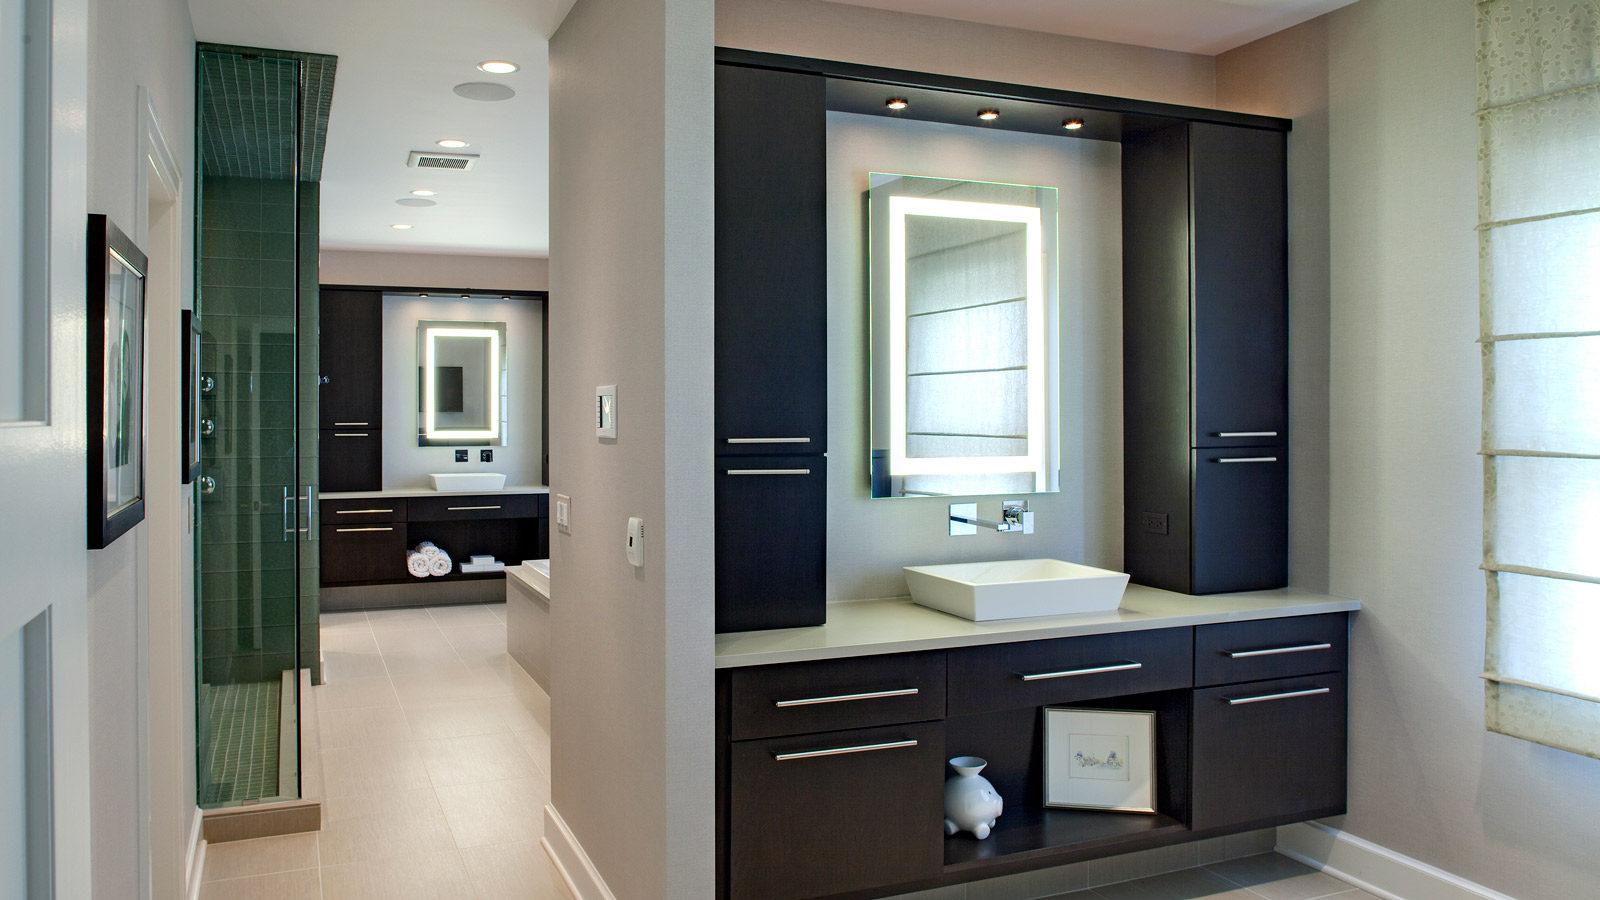 His and Hers Contemporary Master Bathroom - Drury Design